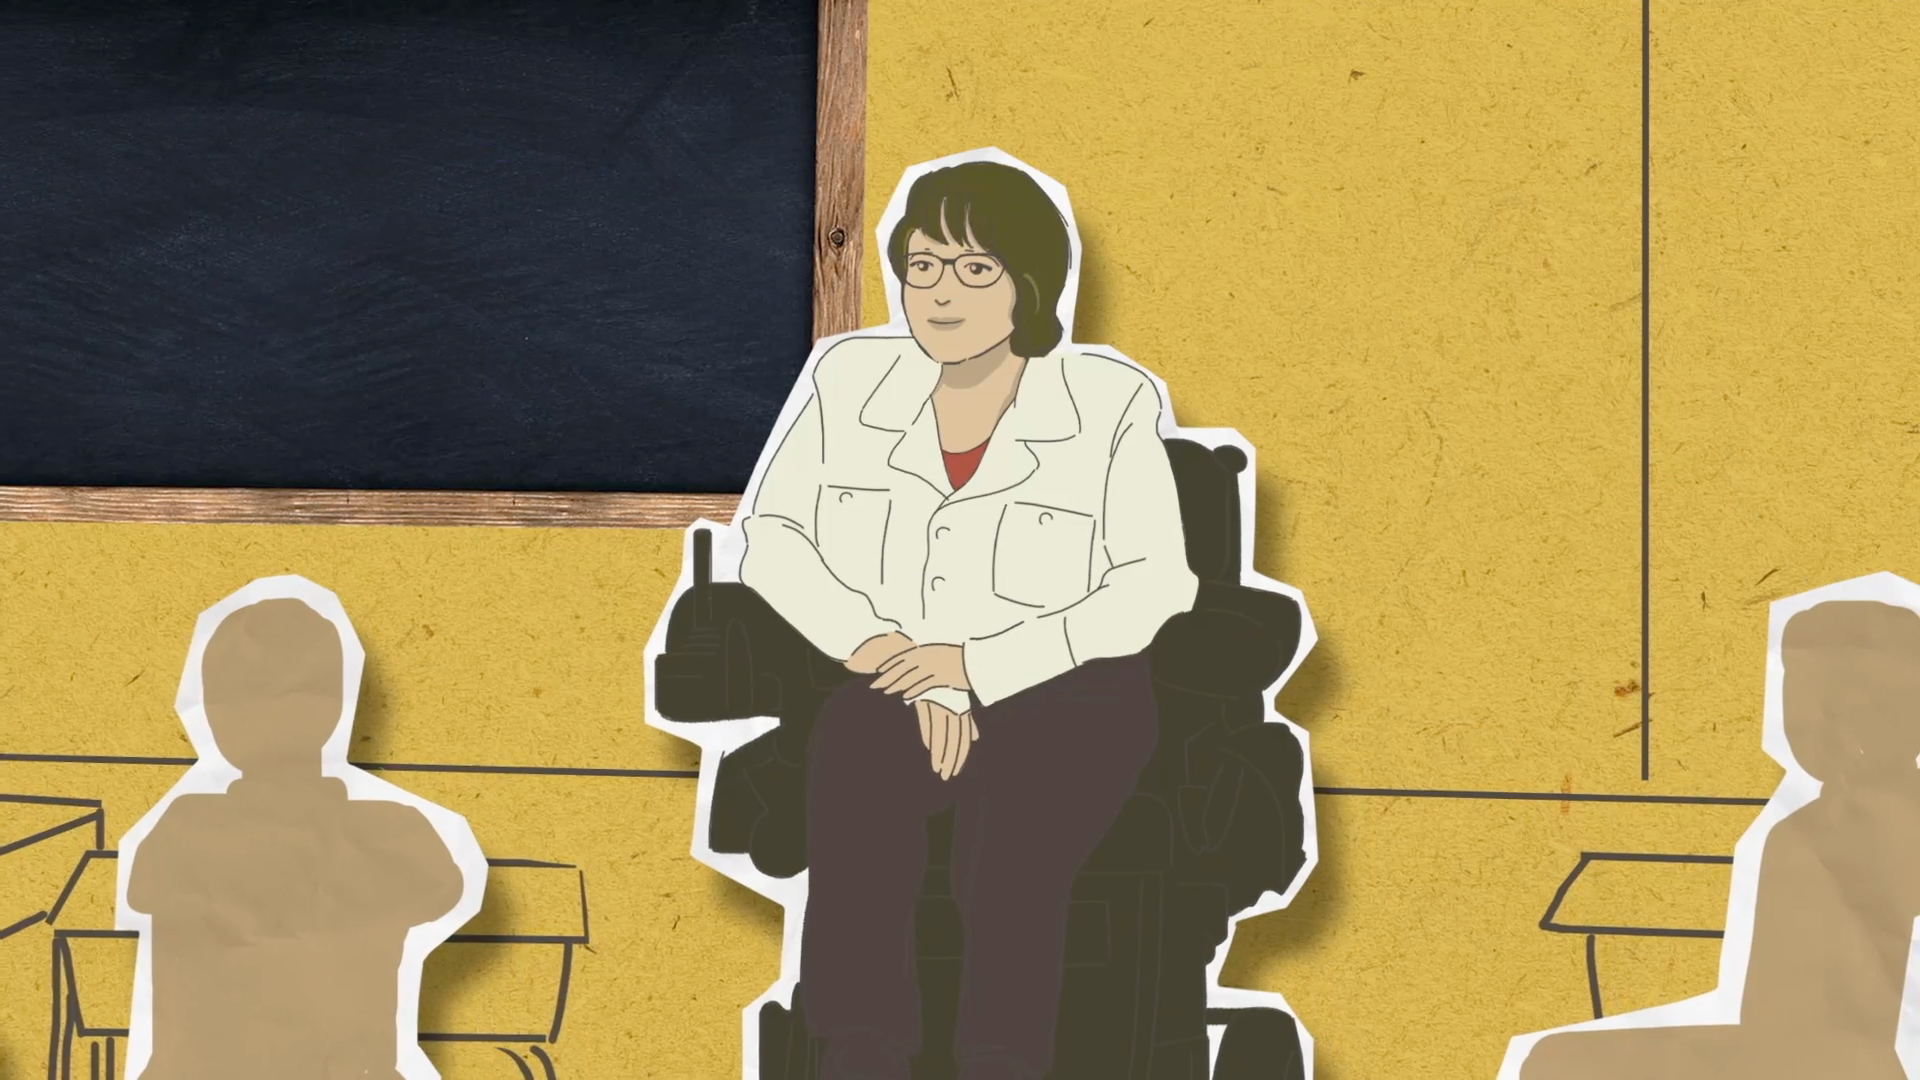 A cartoon graphic of a White woman in a white shirt sitting on a wheelchair.